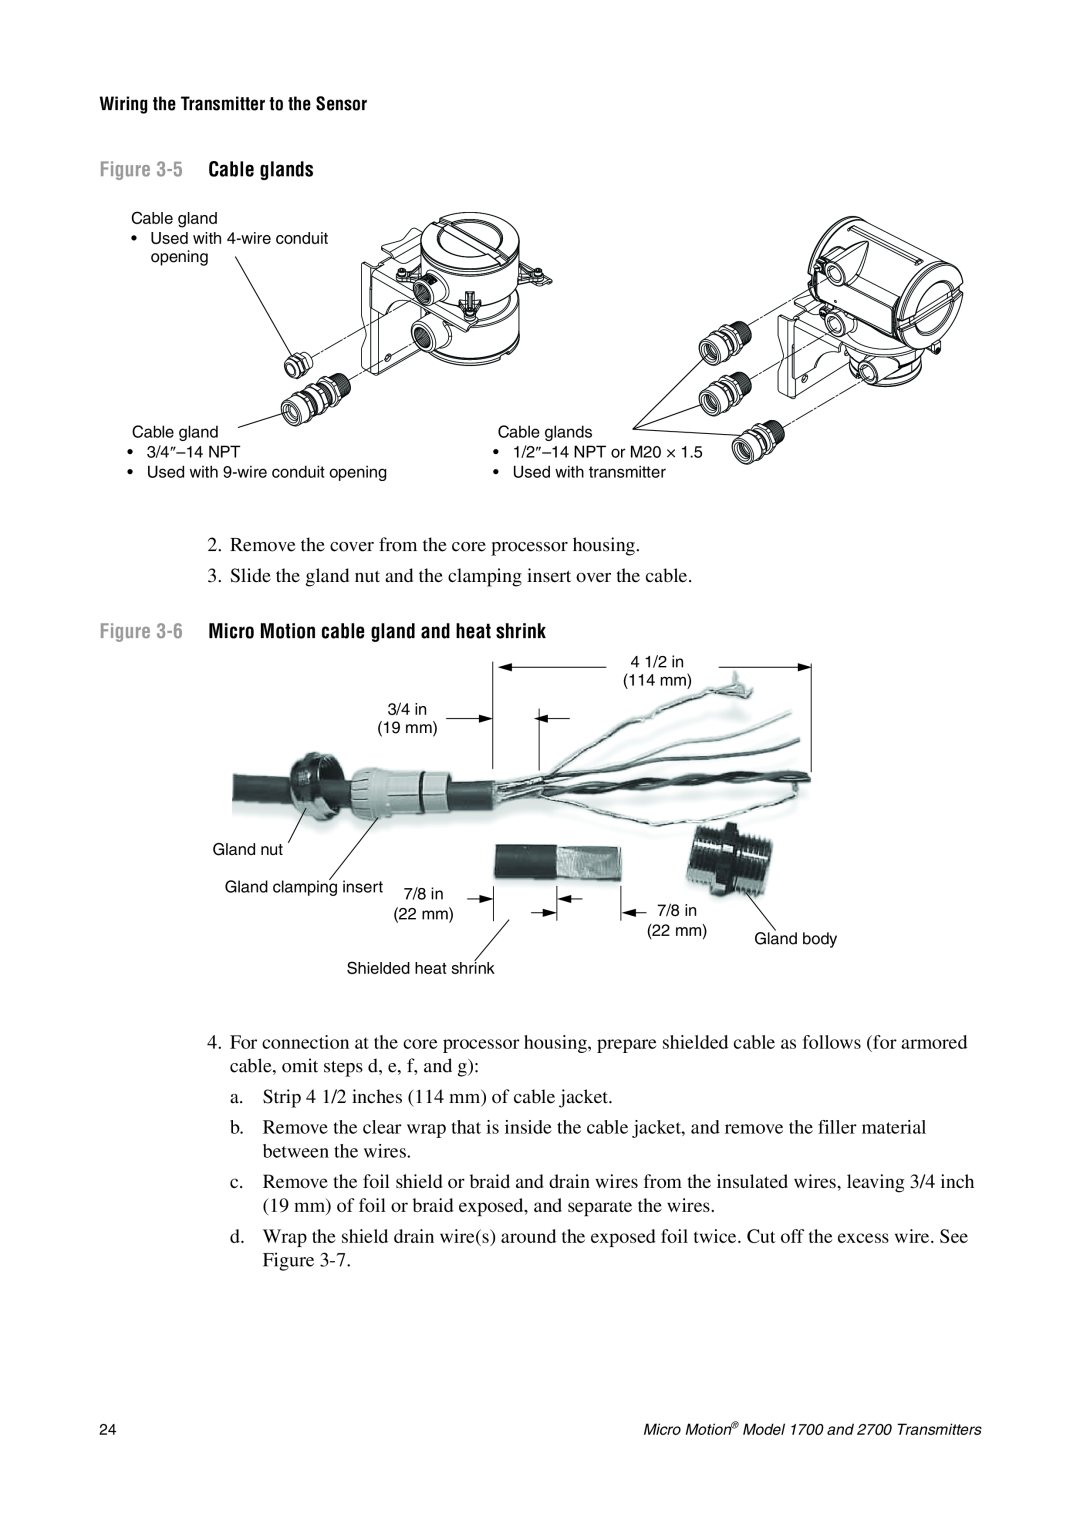 Emerson 1700, 2700 installation manual 5 Cable glands 